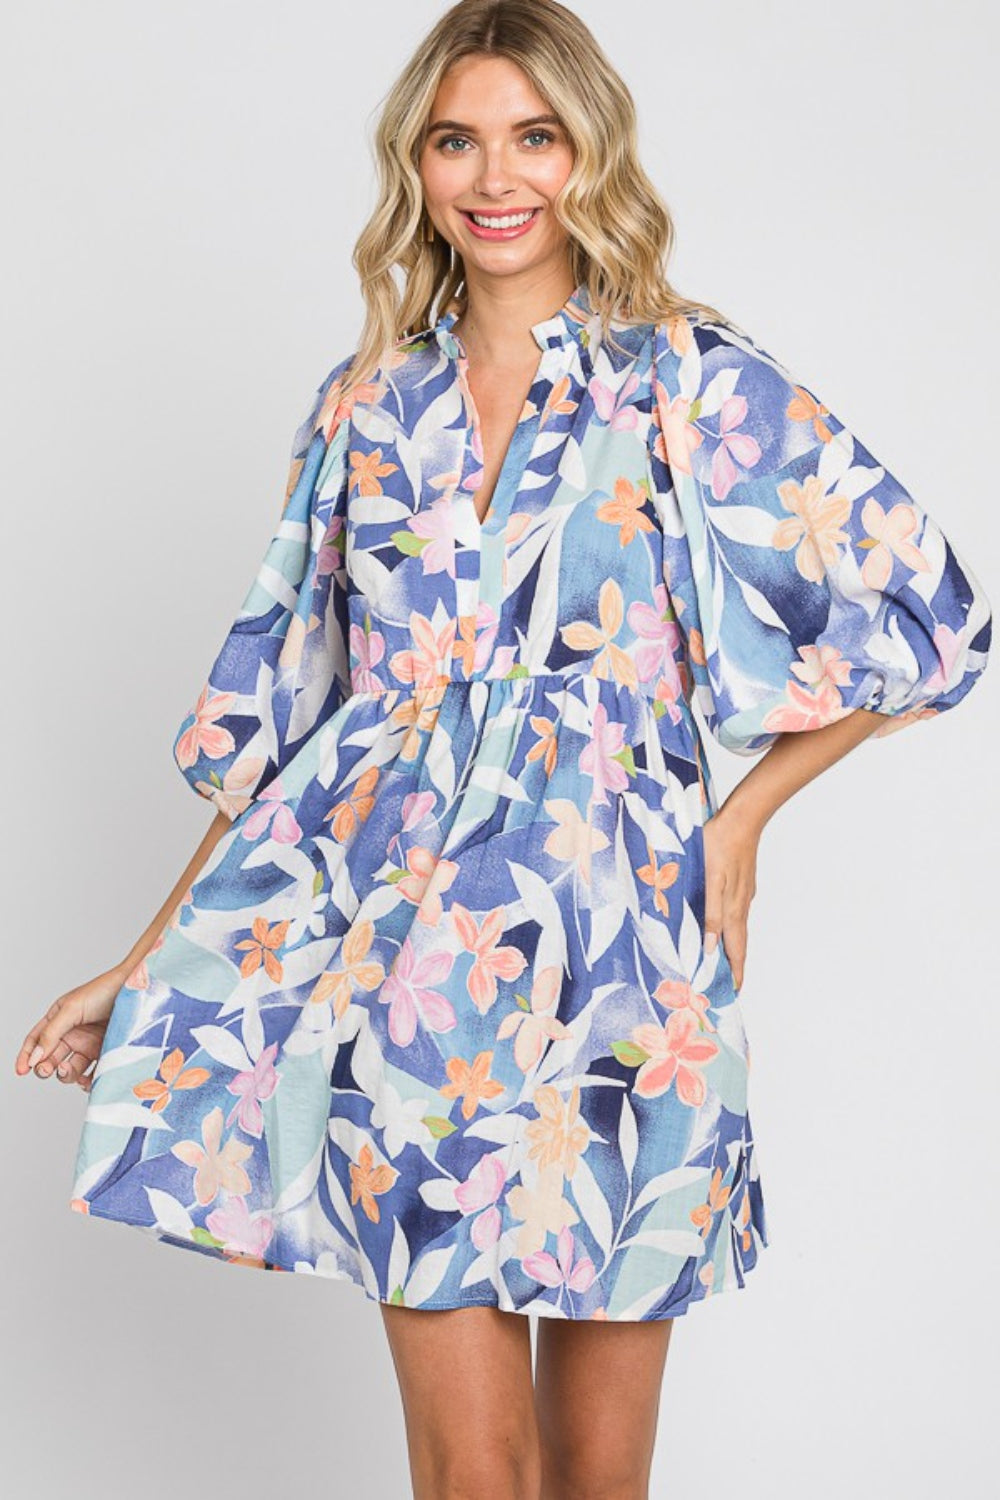 Chic Floral Print Mini Dress for Graduation and Commencement Celebrations